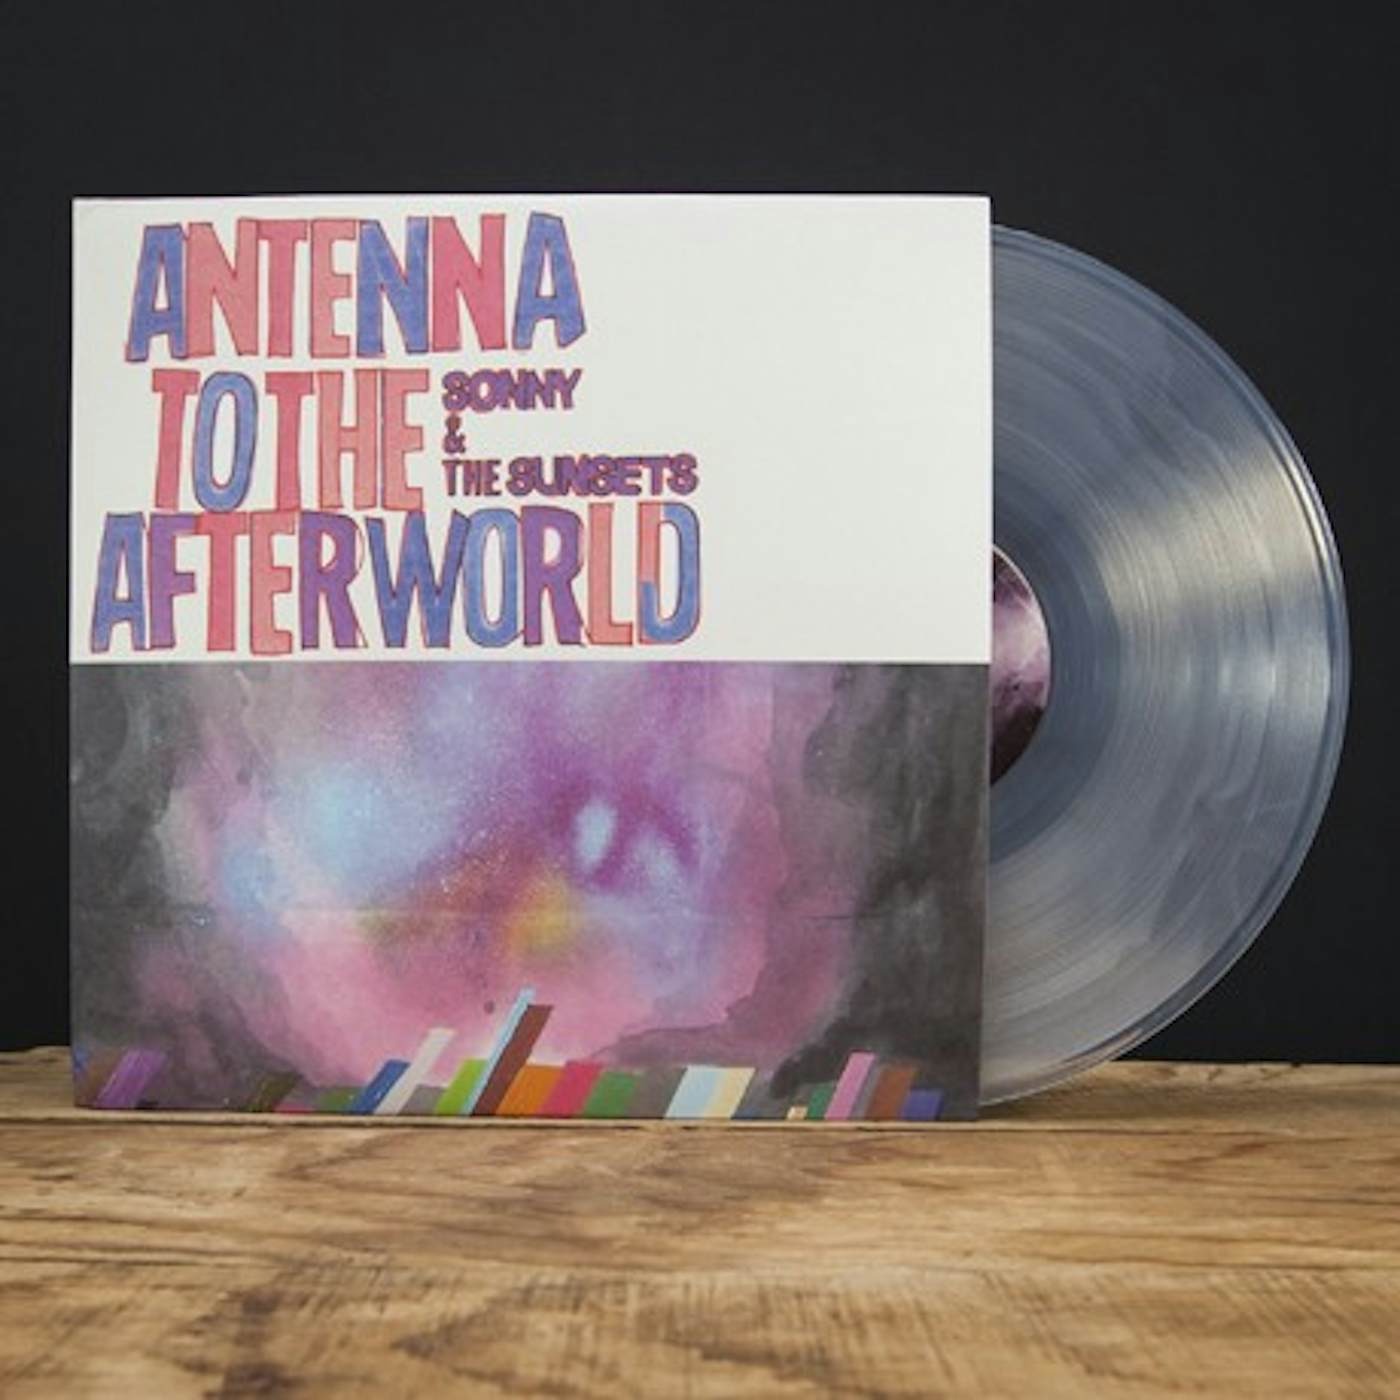 Sonny & The Sunsets Antenna to the Afterworld (Vinyl)